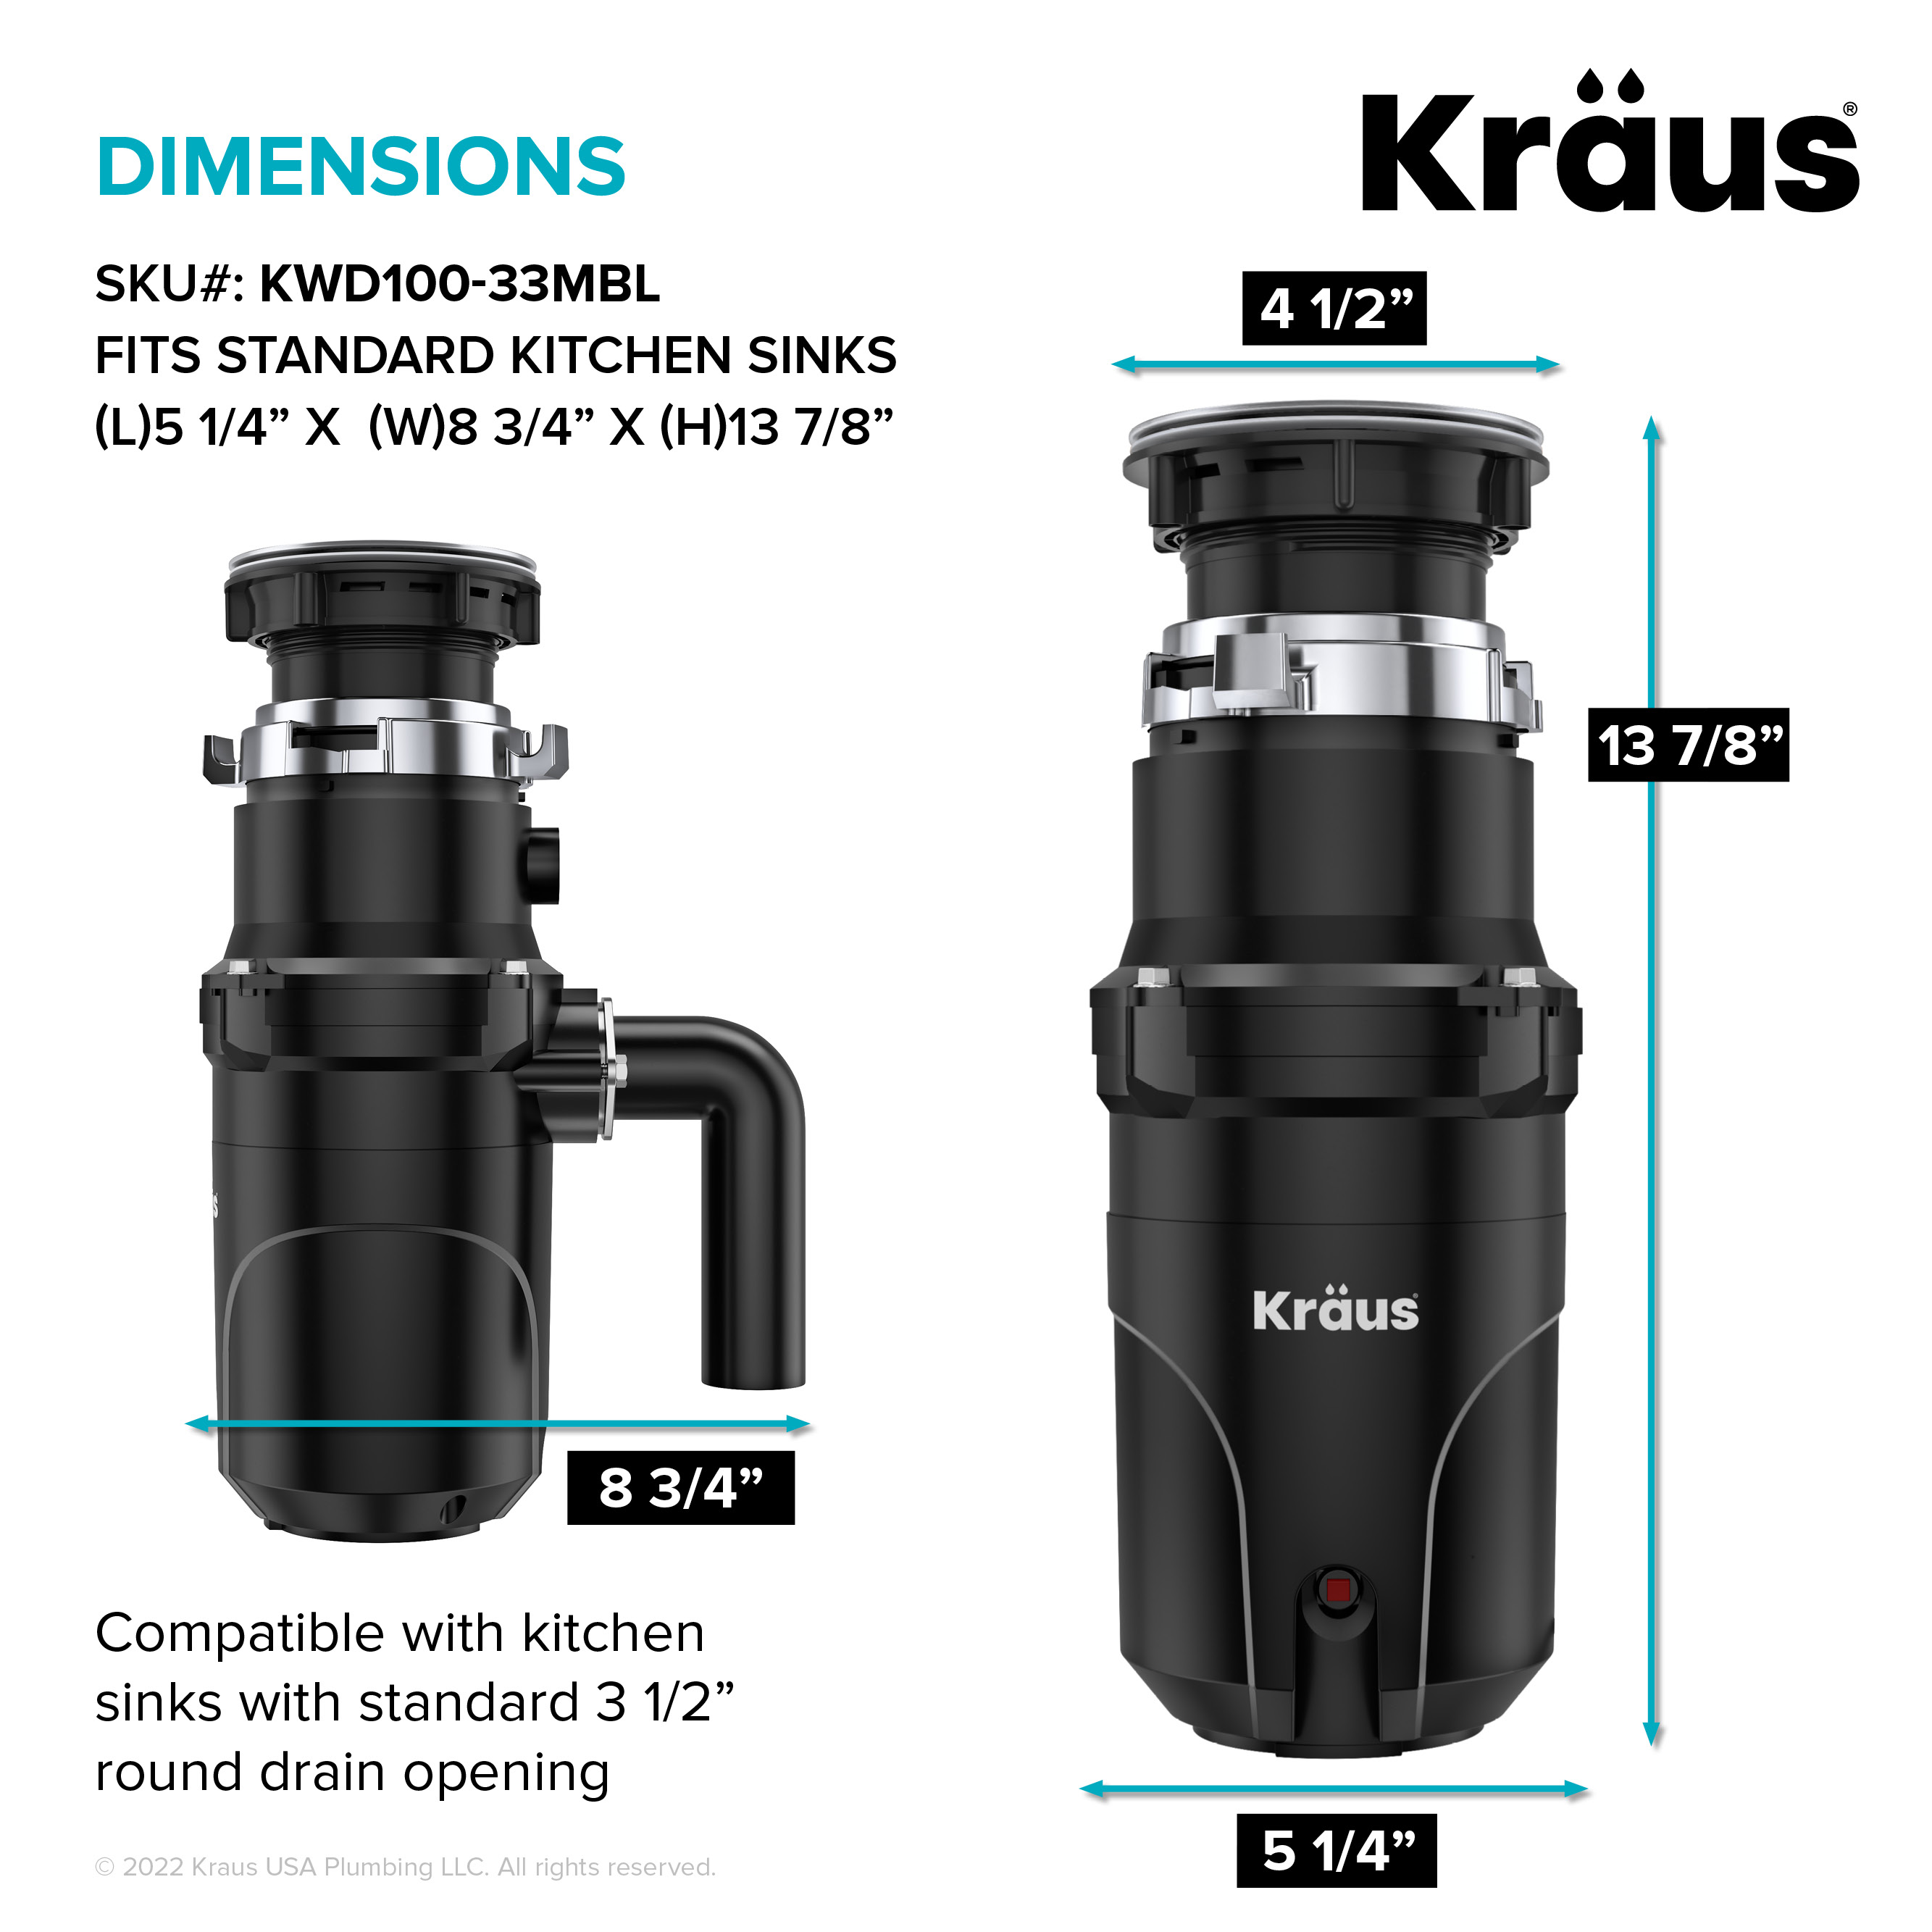 Kraus KWD100-33MBL WasteGuard High-Speed HP Continuous Feed Ultra-Quiet Motor Garbage Disposal with Quick Connect Mount, Black - 1